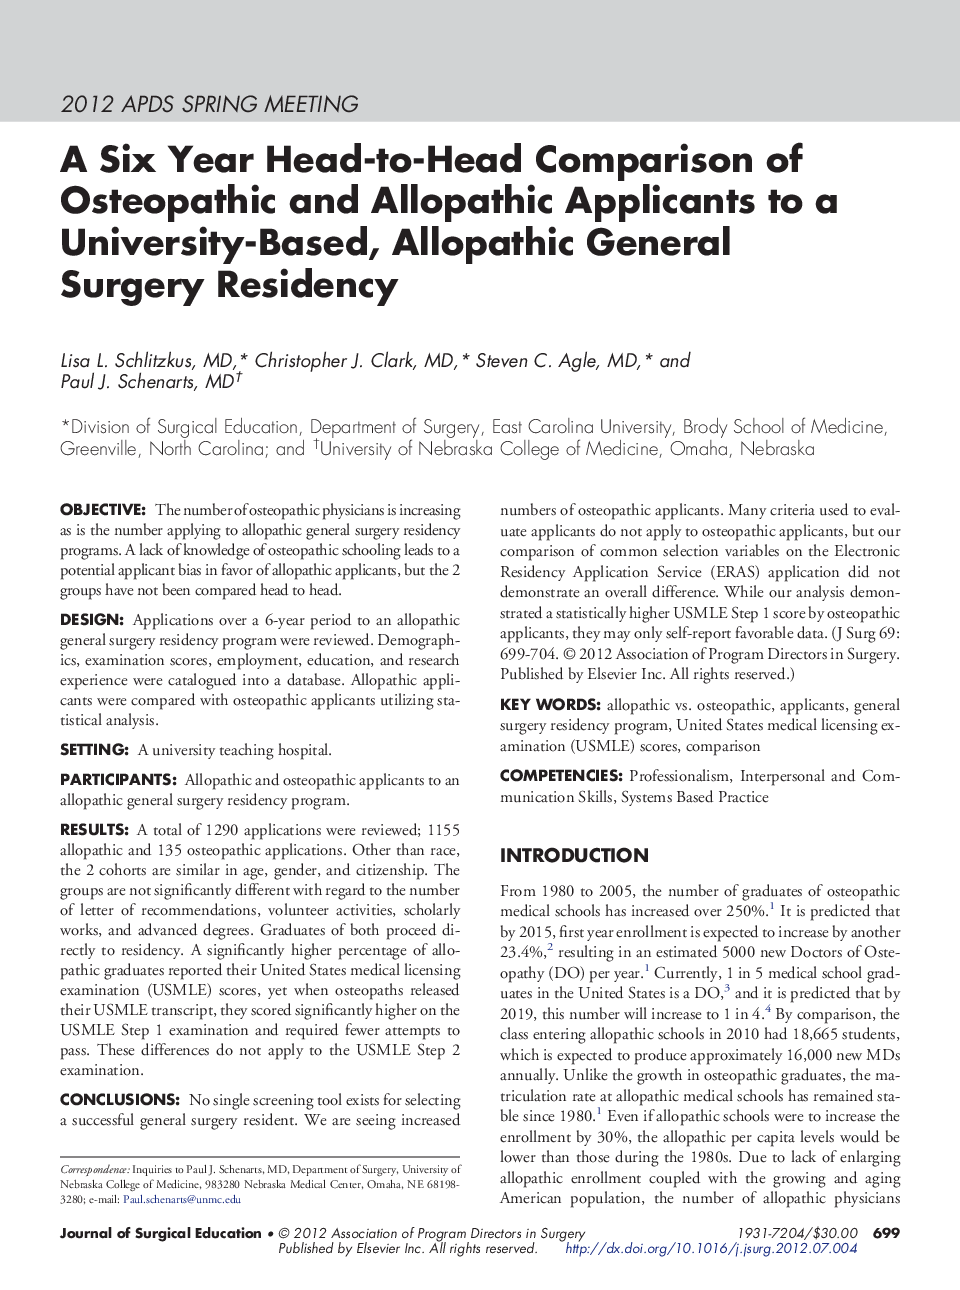 A Six Year Head-to-Head Comparison of Osteopathic and Allopathic Applicants to a University-Based, Allopathic General Surgery Residency